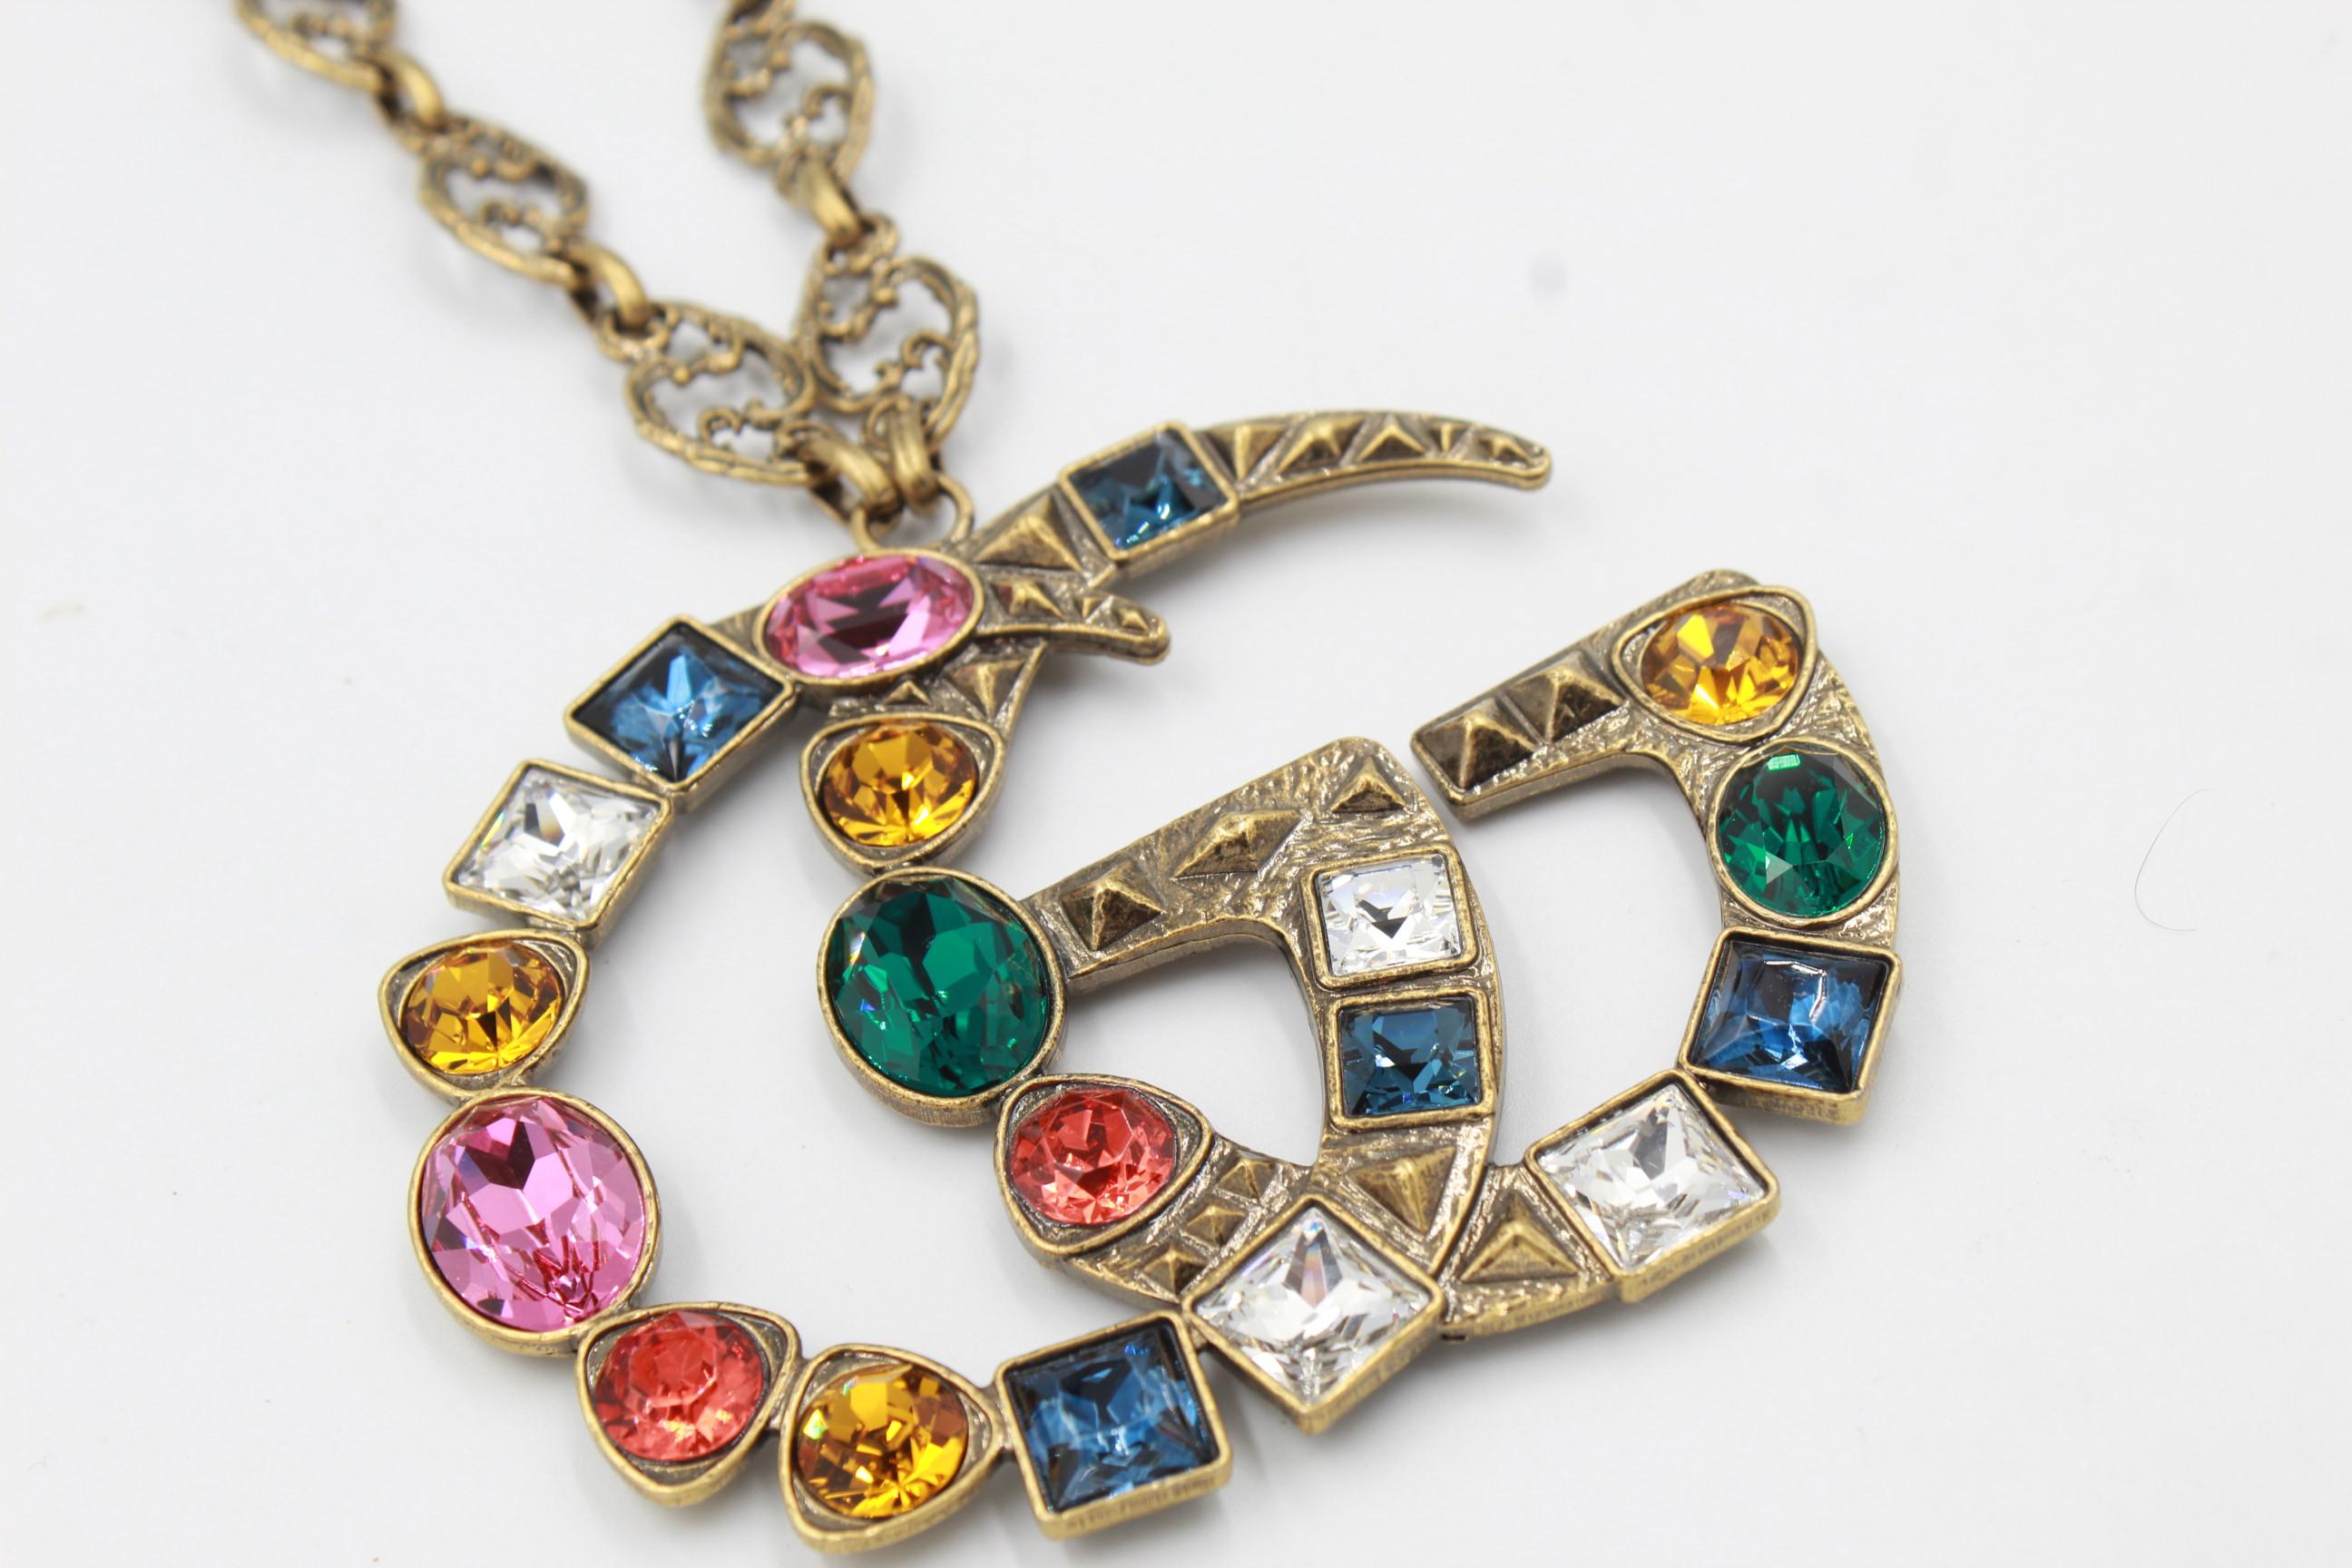 Gucci necklace marmont gg crystal and gold plated.
Multicolor crystals.
Good condition.
GG : 8 cm x 10 cm
Length : 48cm
